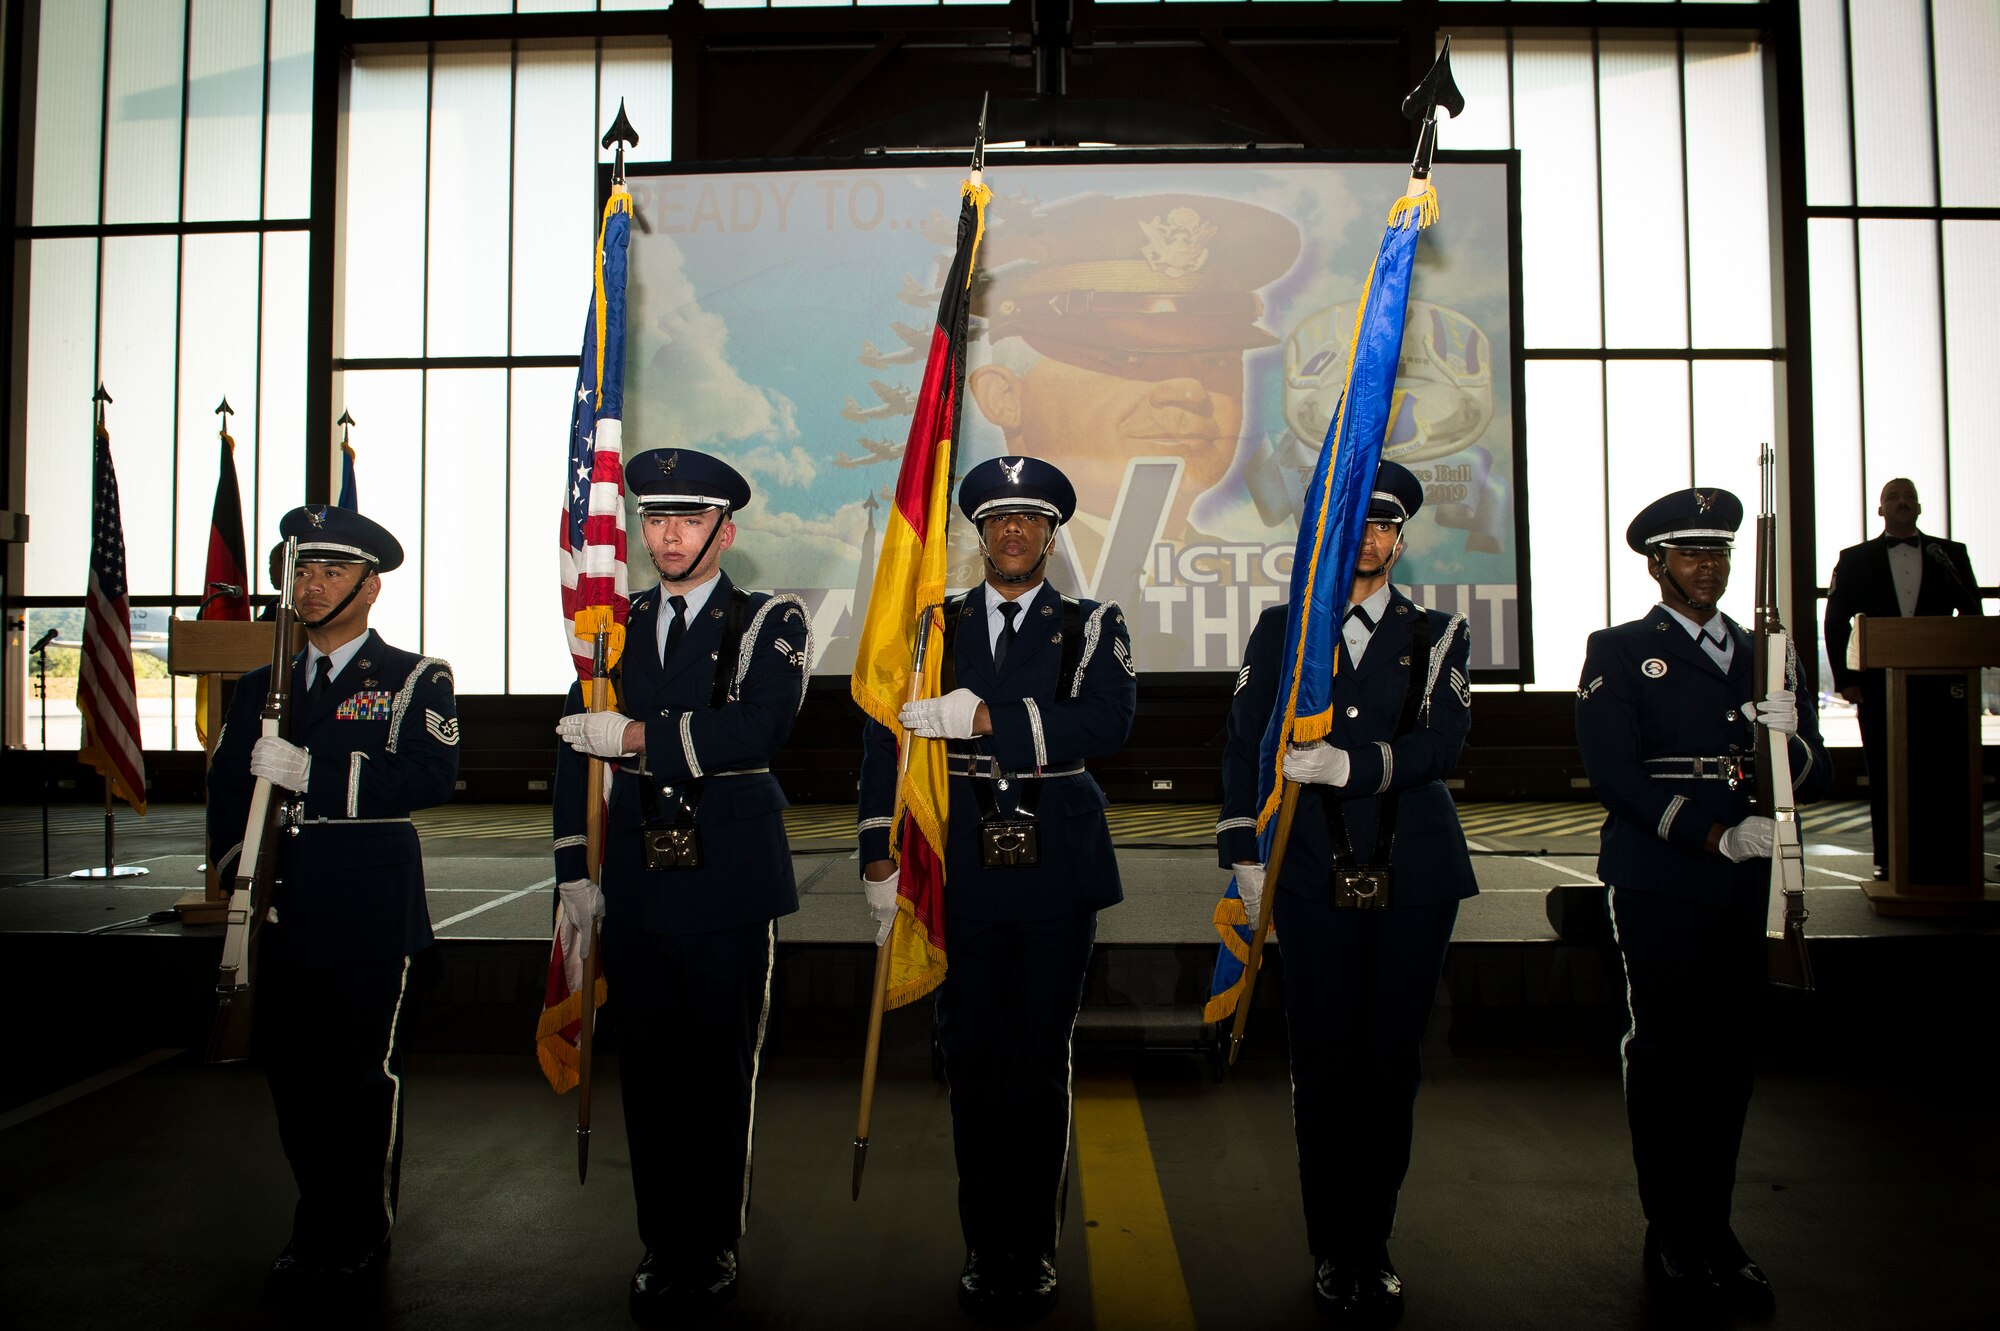 The Ramstein Air Base Honor Guard presents the colors during the 72nd Air Force birthday ball at Ramstein Air Base, Germany, Sept. 21, 2019. More than 900 Airmen gathered to celebrate the Air Force’s birthday. (U.S. Air Force photo by Staff Sgt. Jonathan Bass)